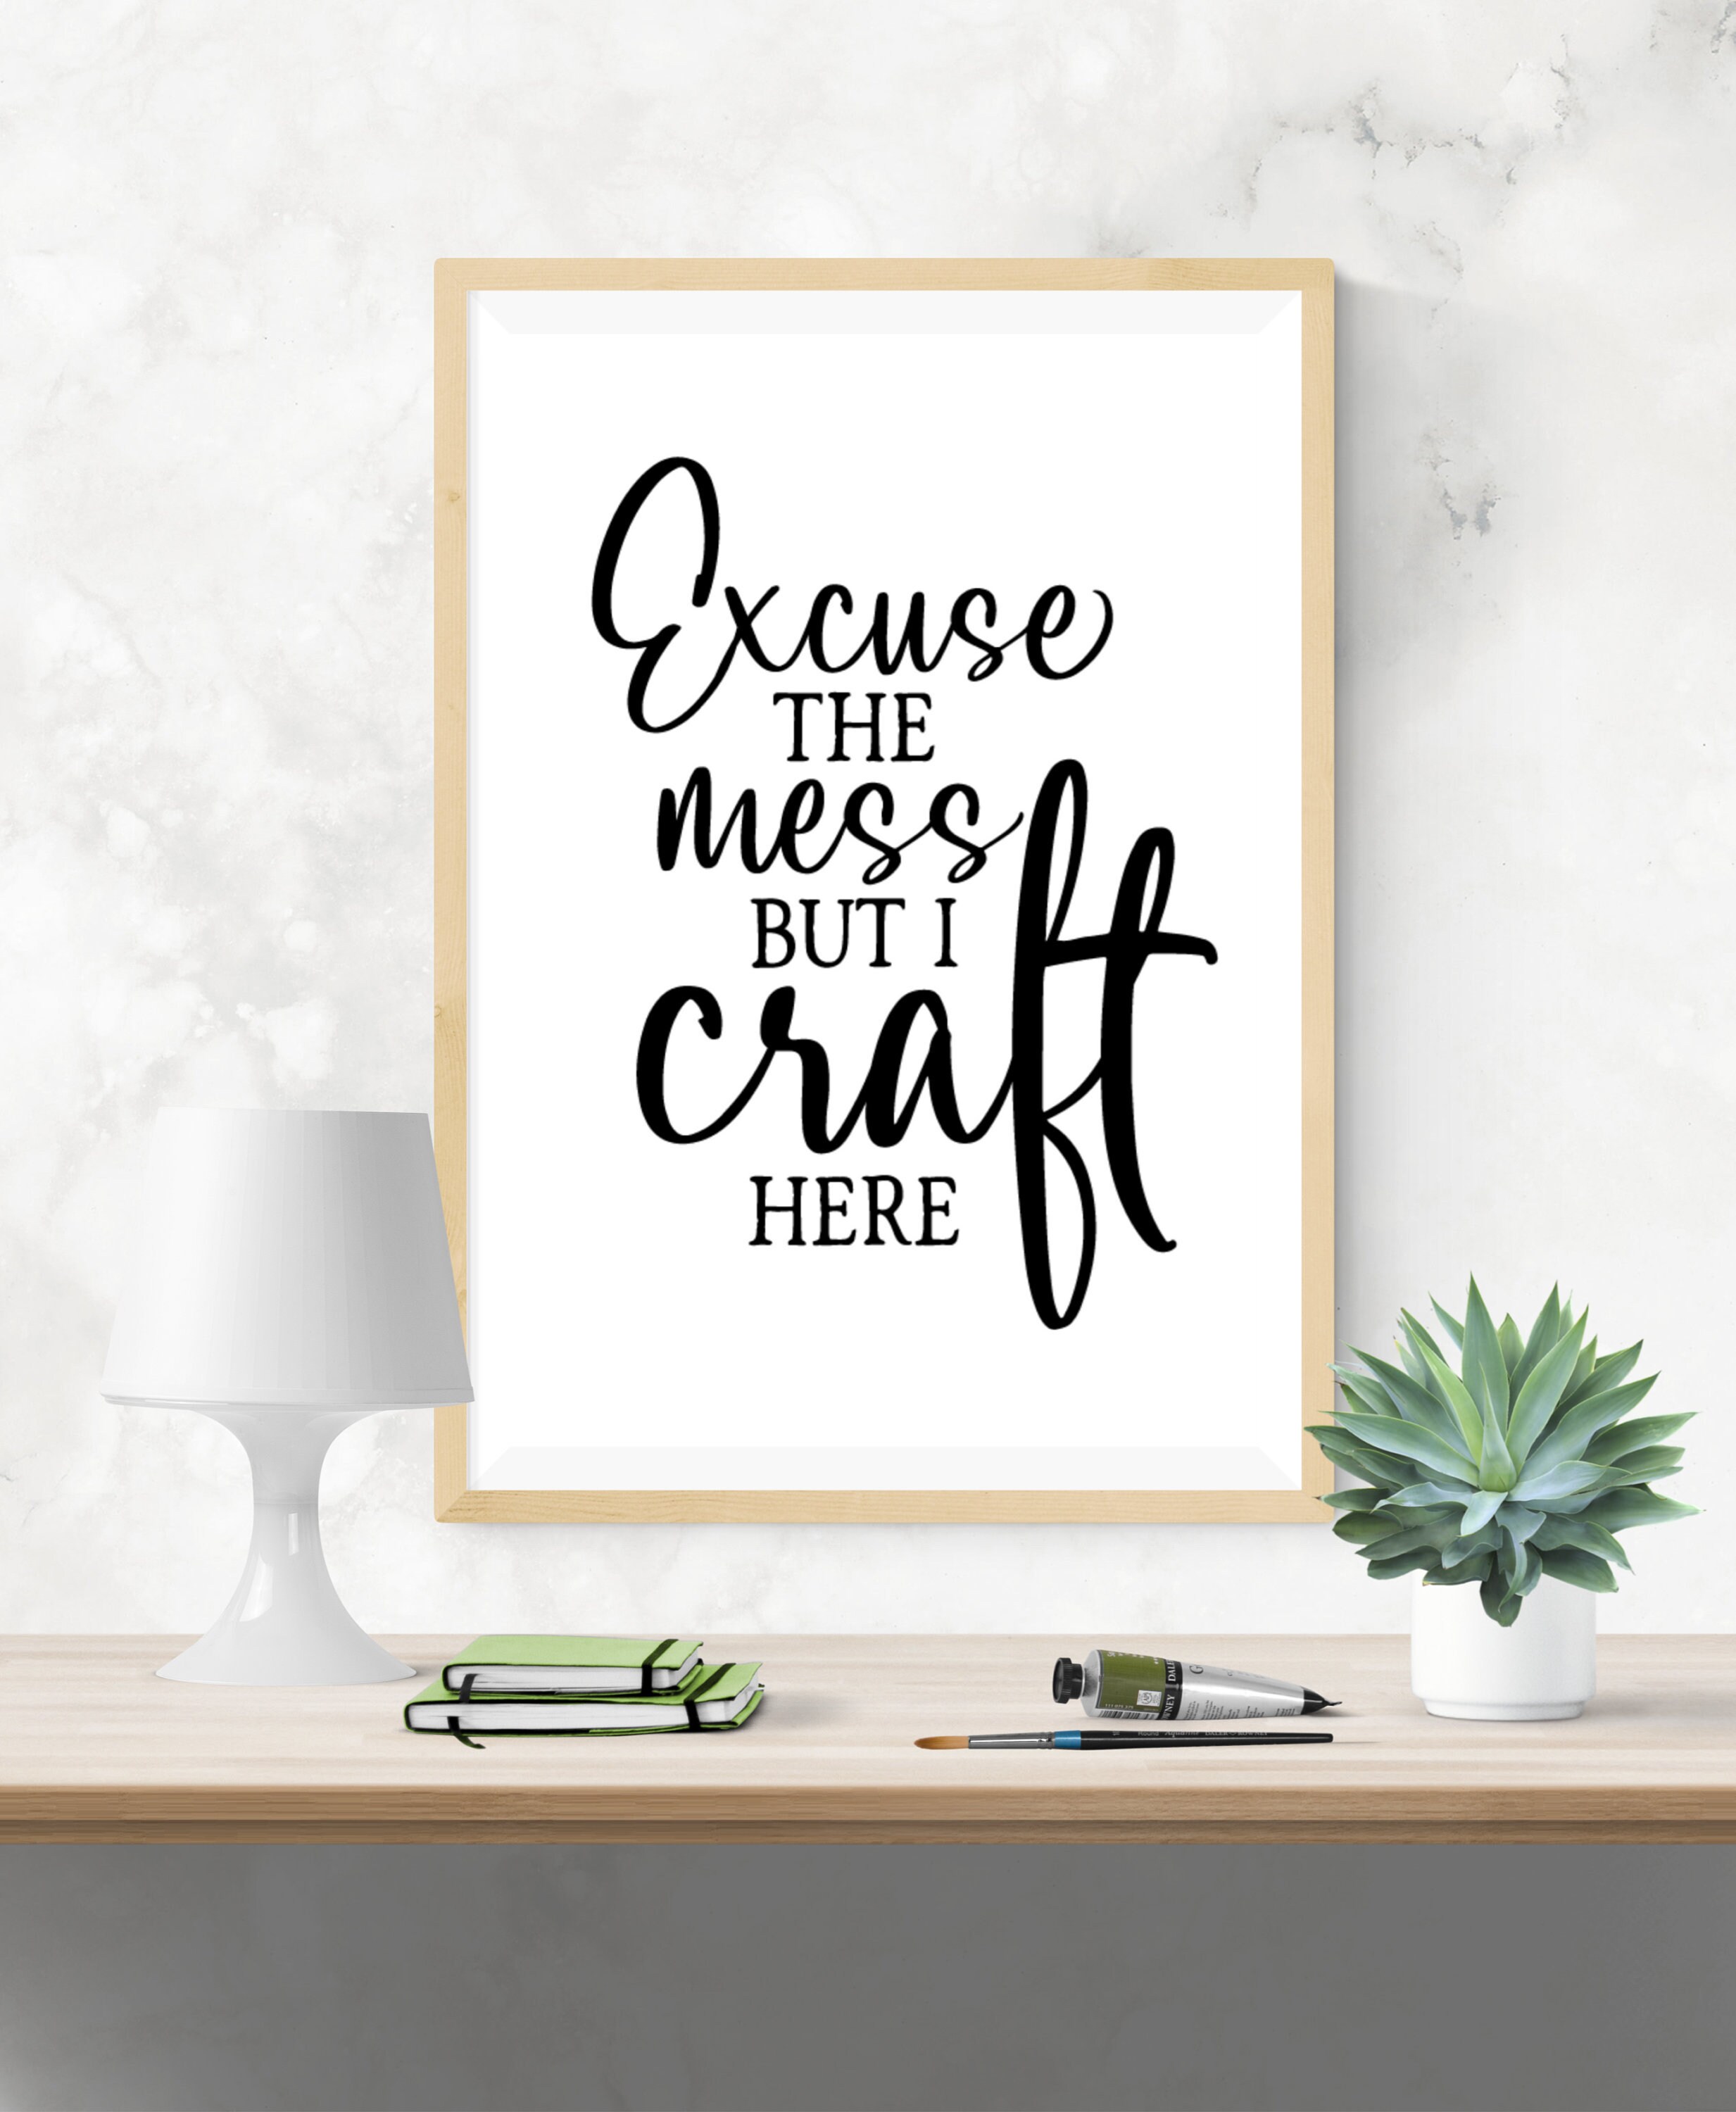 Creative, Funny and Inspiring Craft Quotes